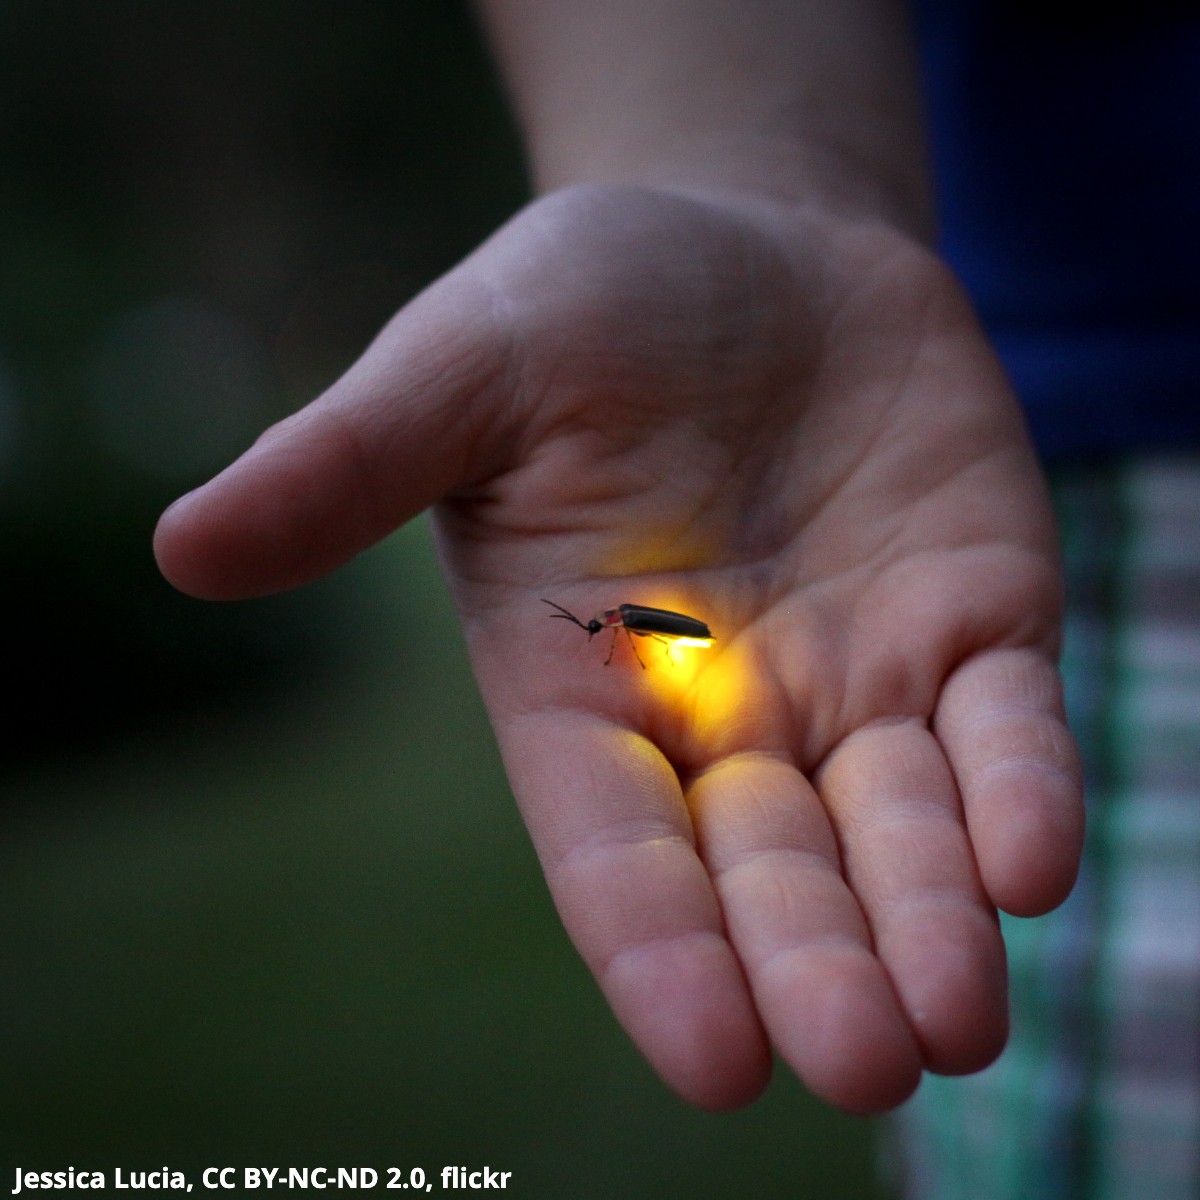 DYK? Fireflies use a system of flashes in some of the ways we use words: to attract, to say, “Here I am,” even to deceive. They emit light from a tiny organ, called a lantern, on the underside of their abdomen, where a biochemical reaction releases energy in the form of light.